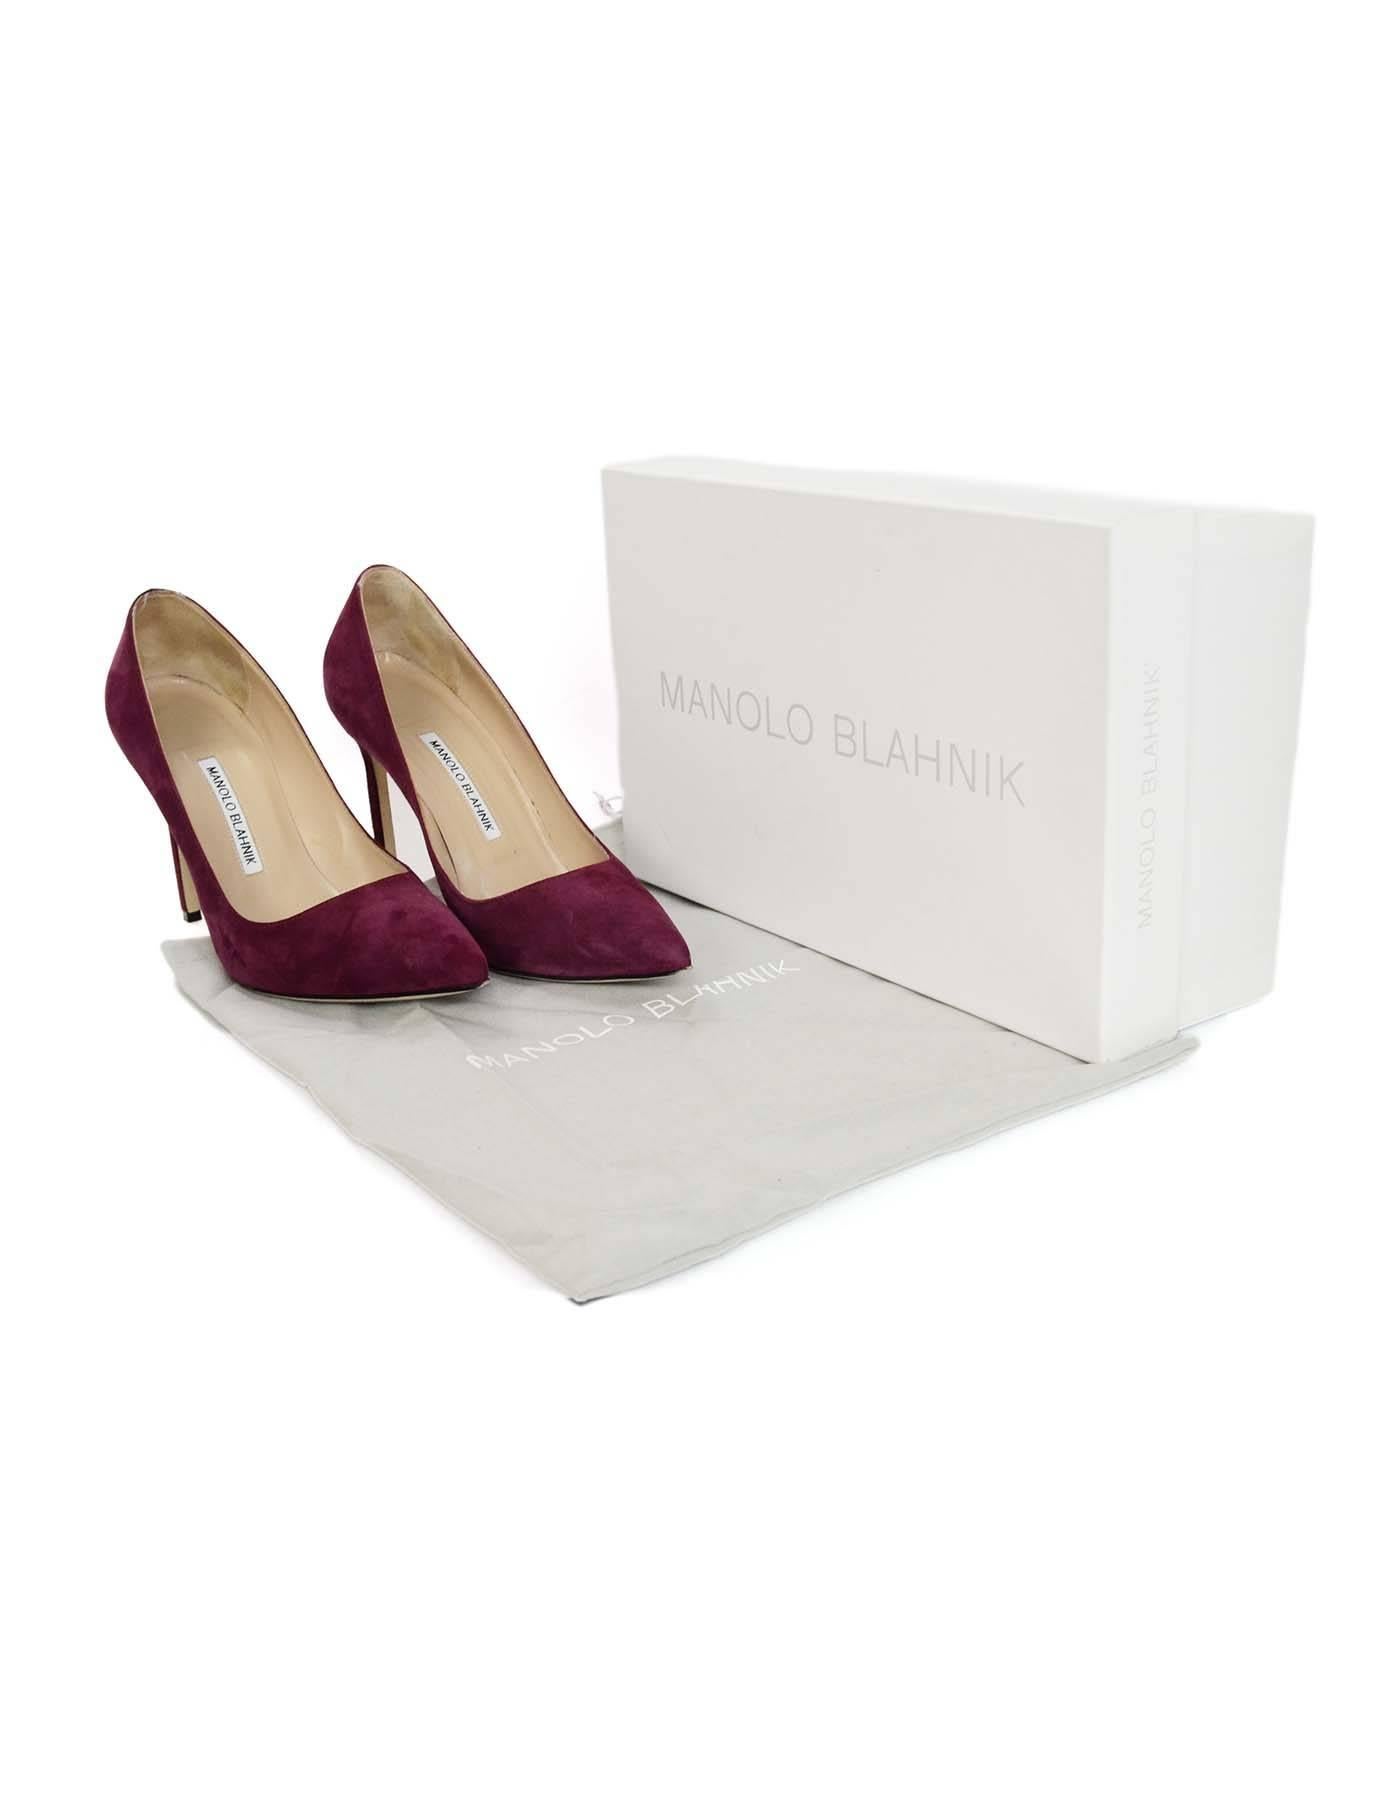 Manolo Blahnik Burgundy Suede BB Pumps Sz 38 with Box and DB 2